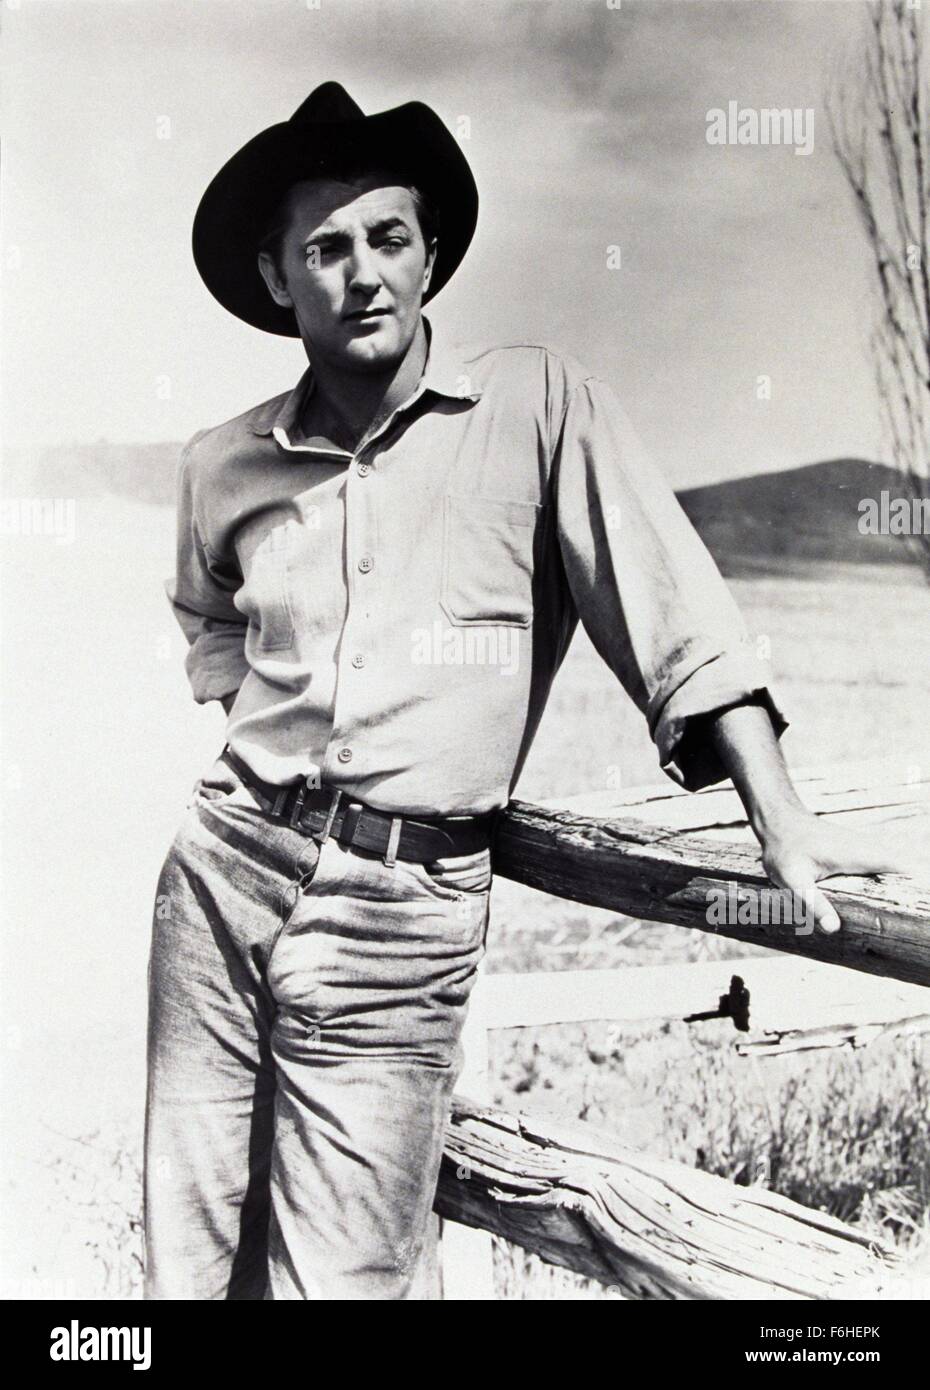 1948, Film Title: RED PONY, Director: LEWIS MILESTONE, Studio: REPUBLIC, Pictured: CLOTHING, ROBERT MITCHUM, WESTERN, COWBOY, FARM, RANCH, COOL, TOUGH GUYS, COWBOY HAT, FENCH, OUTDOORS, EXTERIOR, JEANS, DIMPLE. (Credit Image: SNAP) Stock Photo